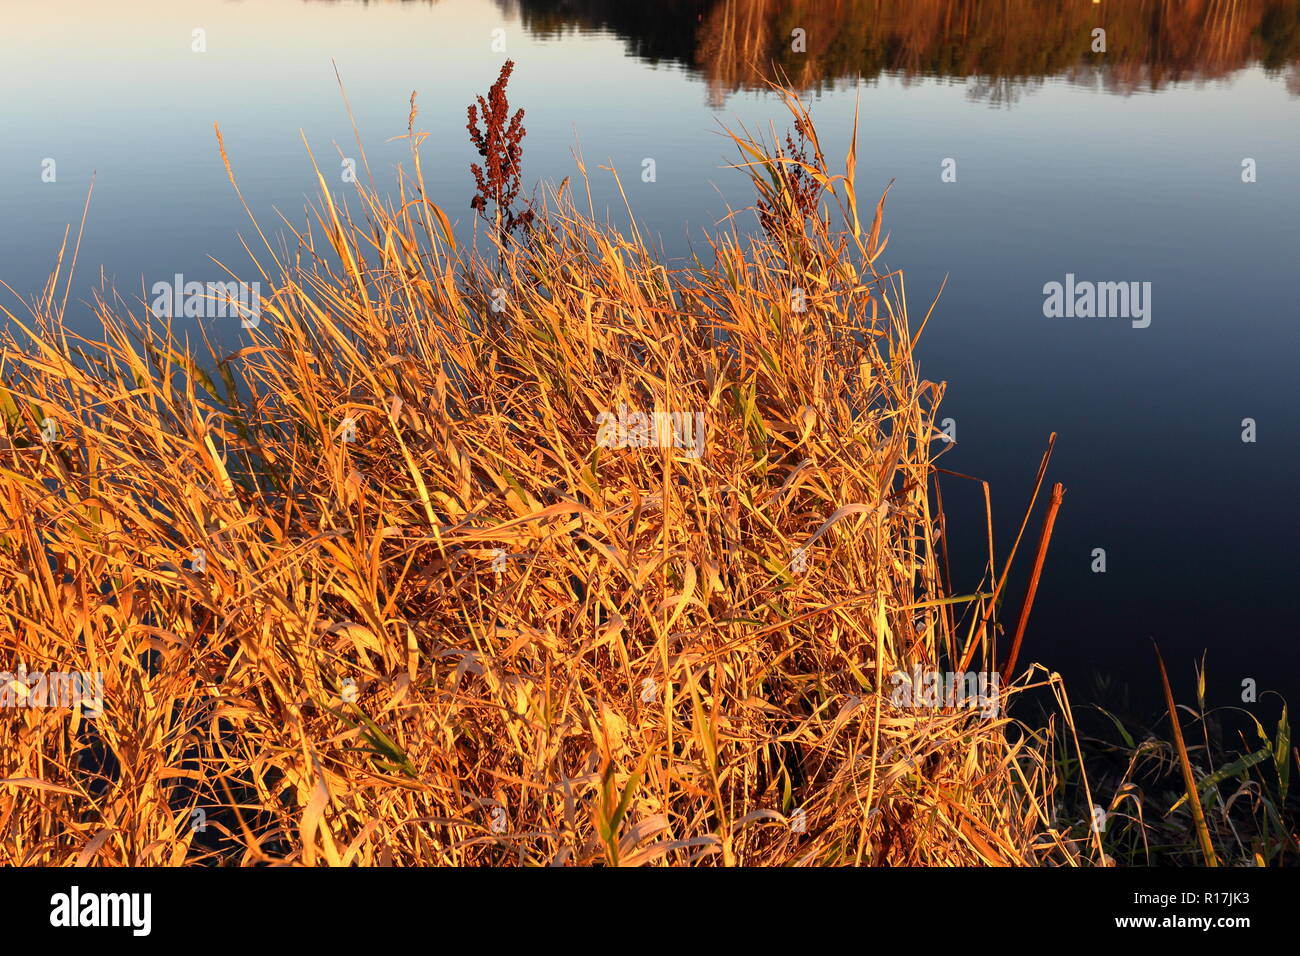 Rushes, reeds, grass, water plants by the lake at sunset in autumn Stock Photo